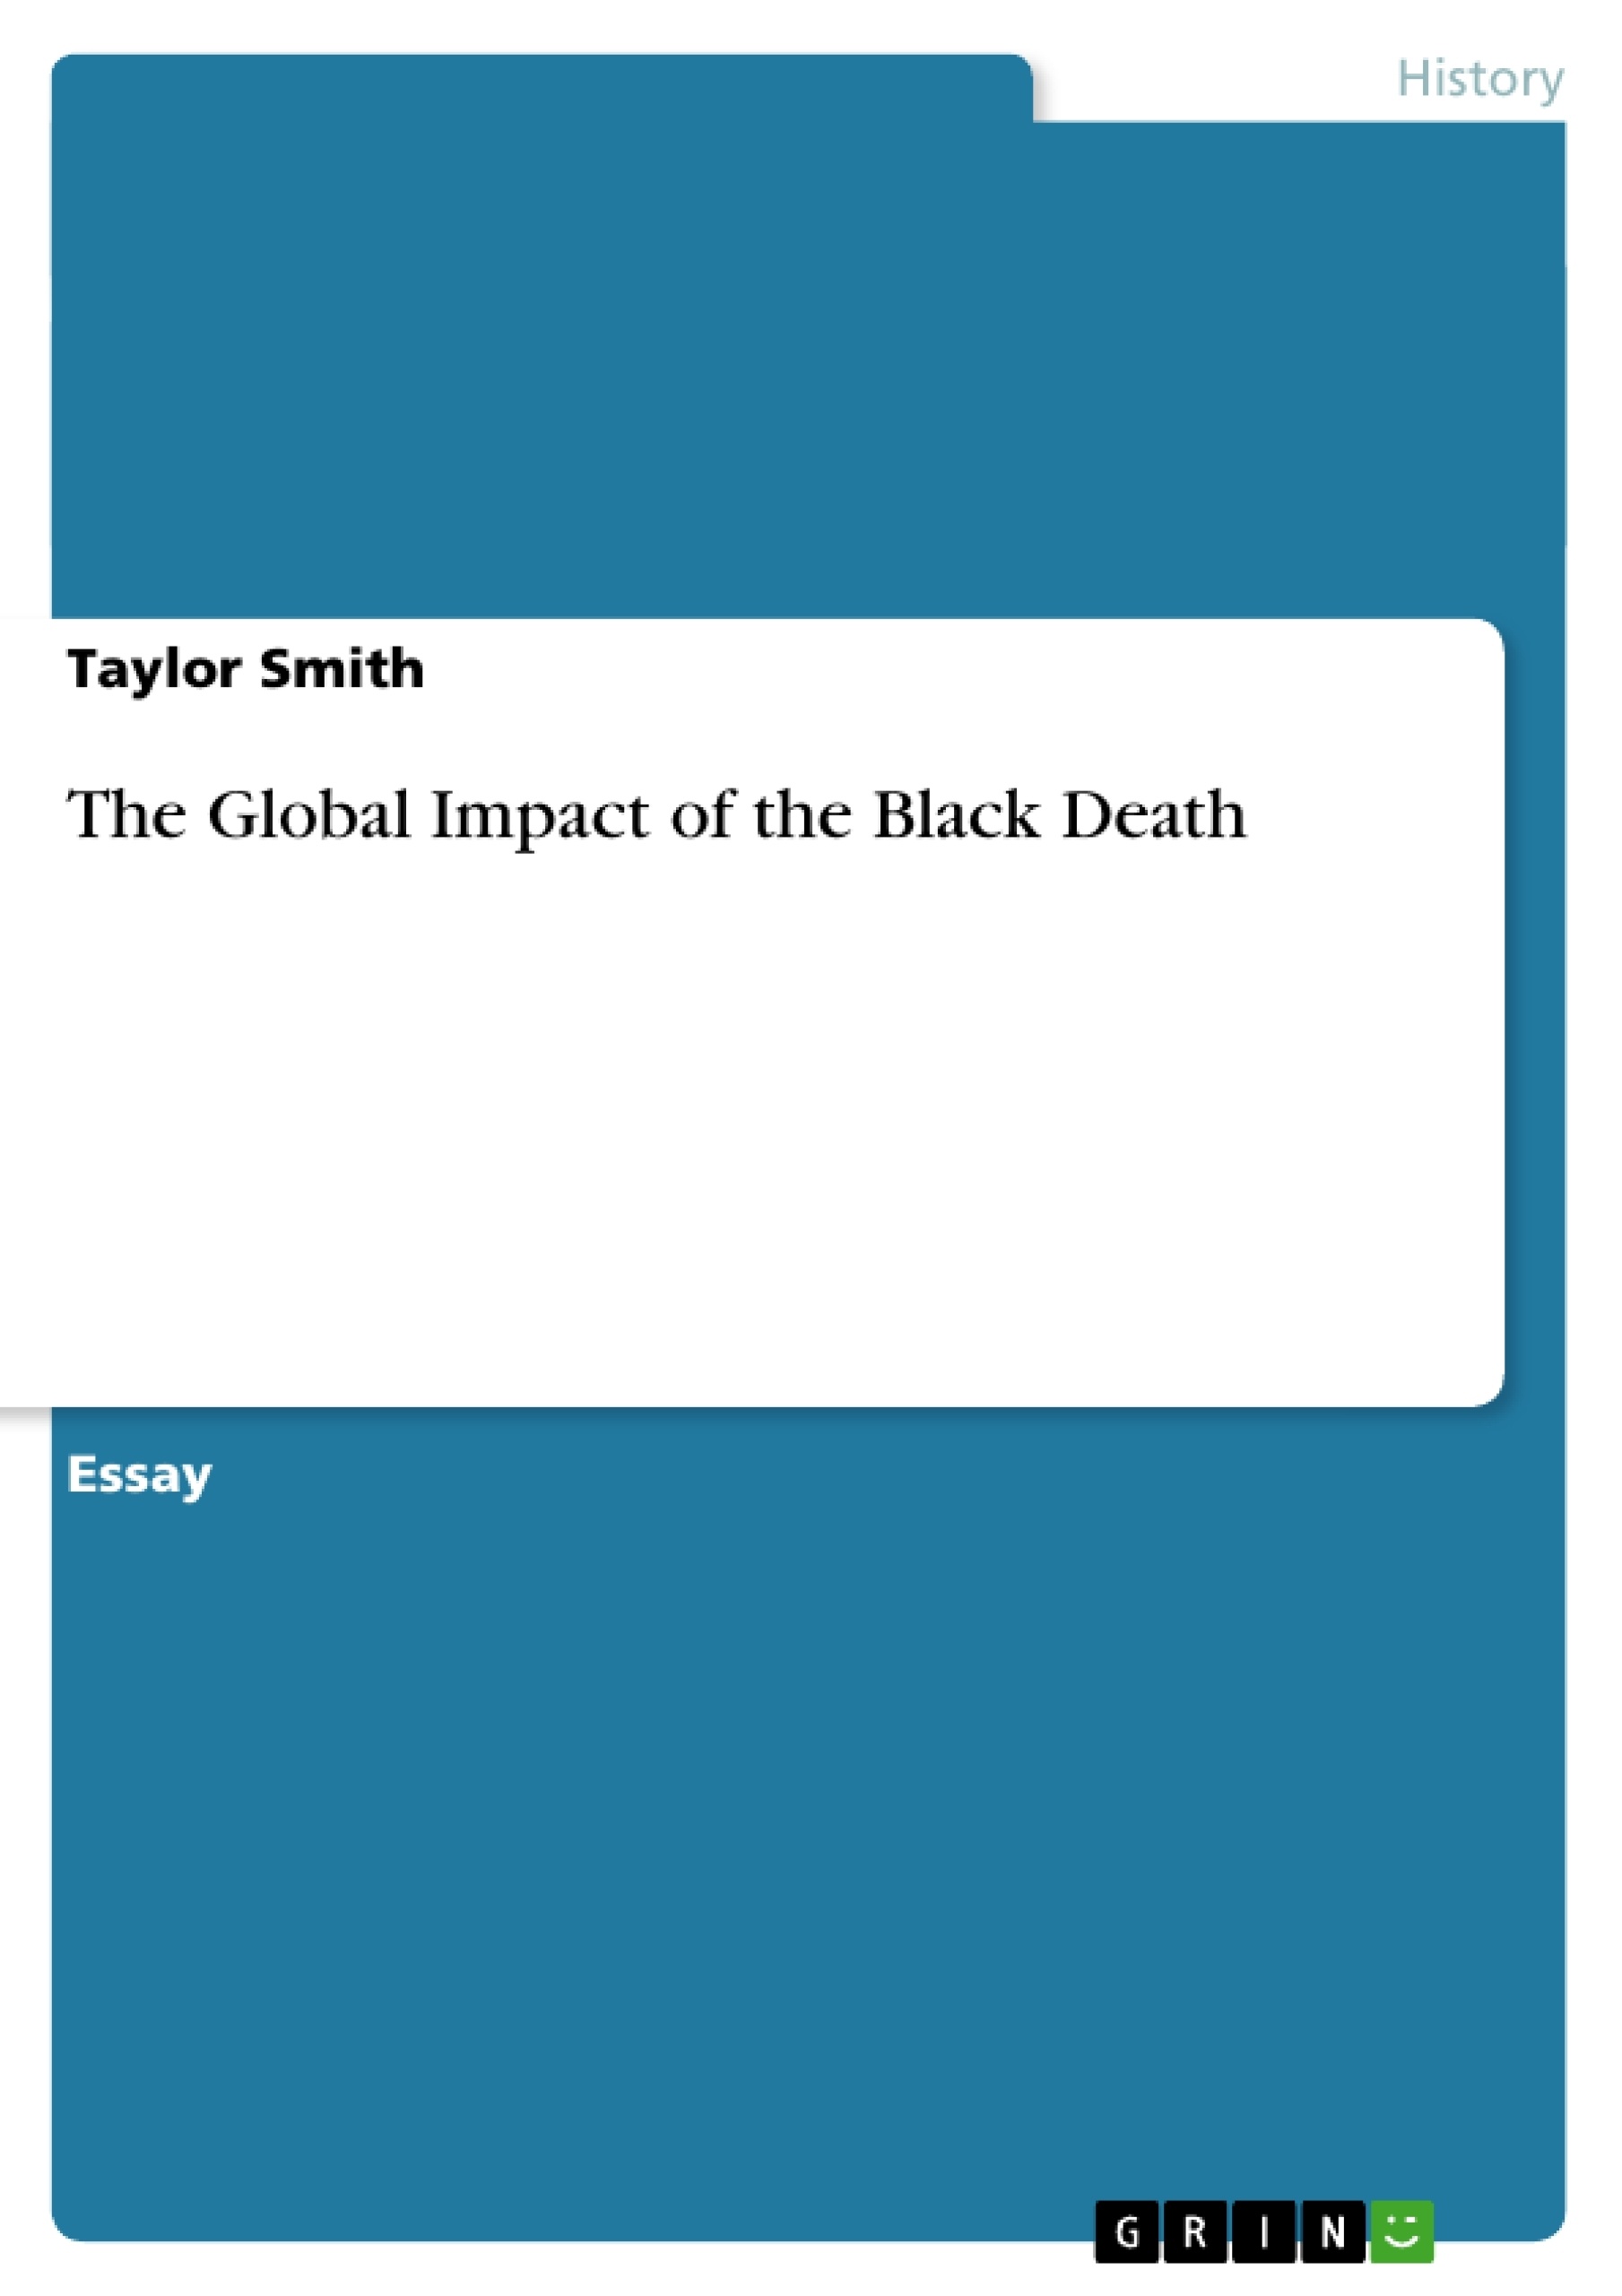 Title: The Global Impact of the Black Death